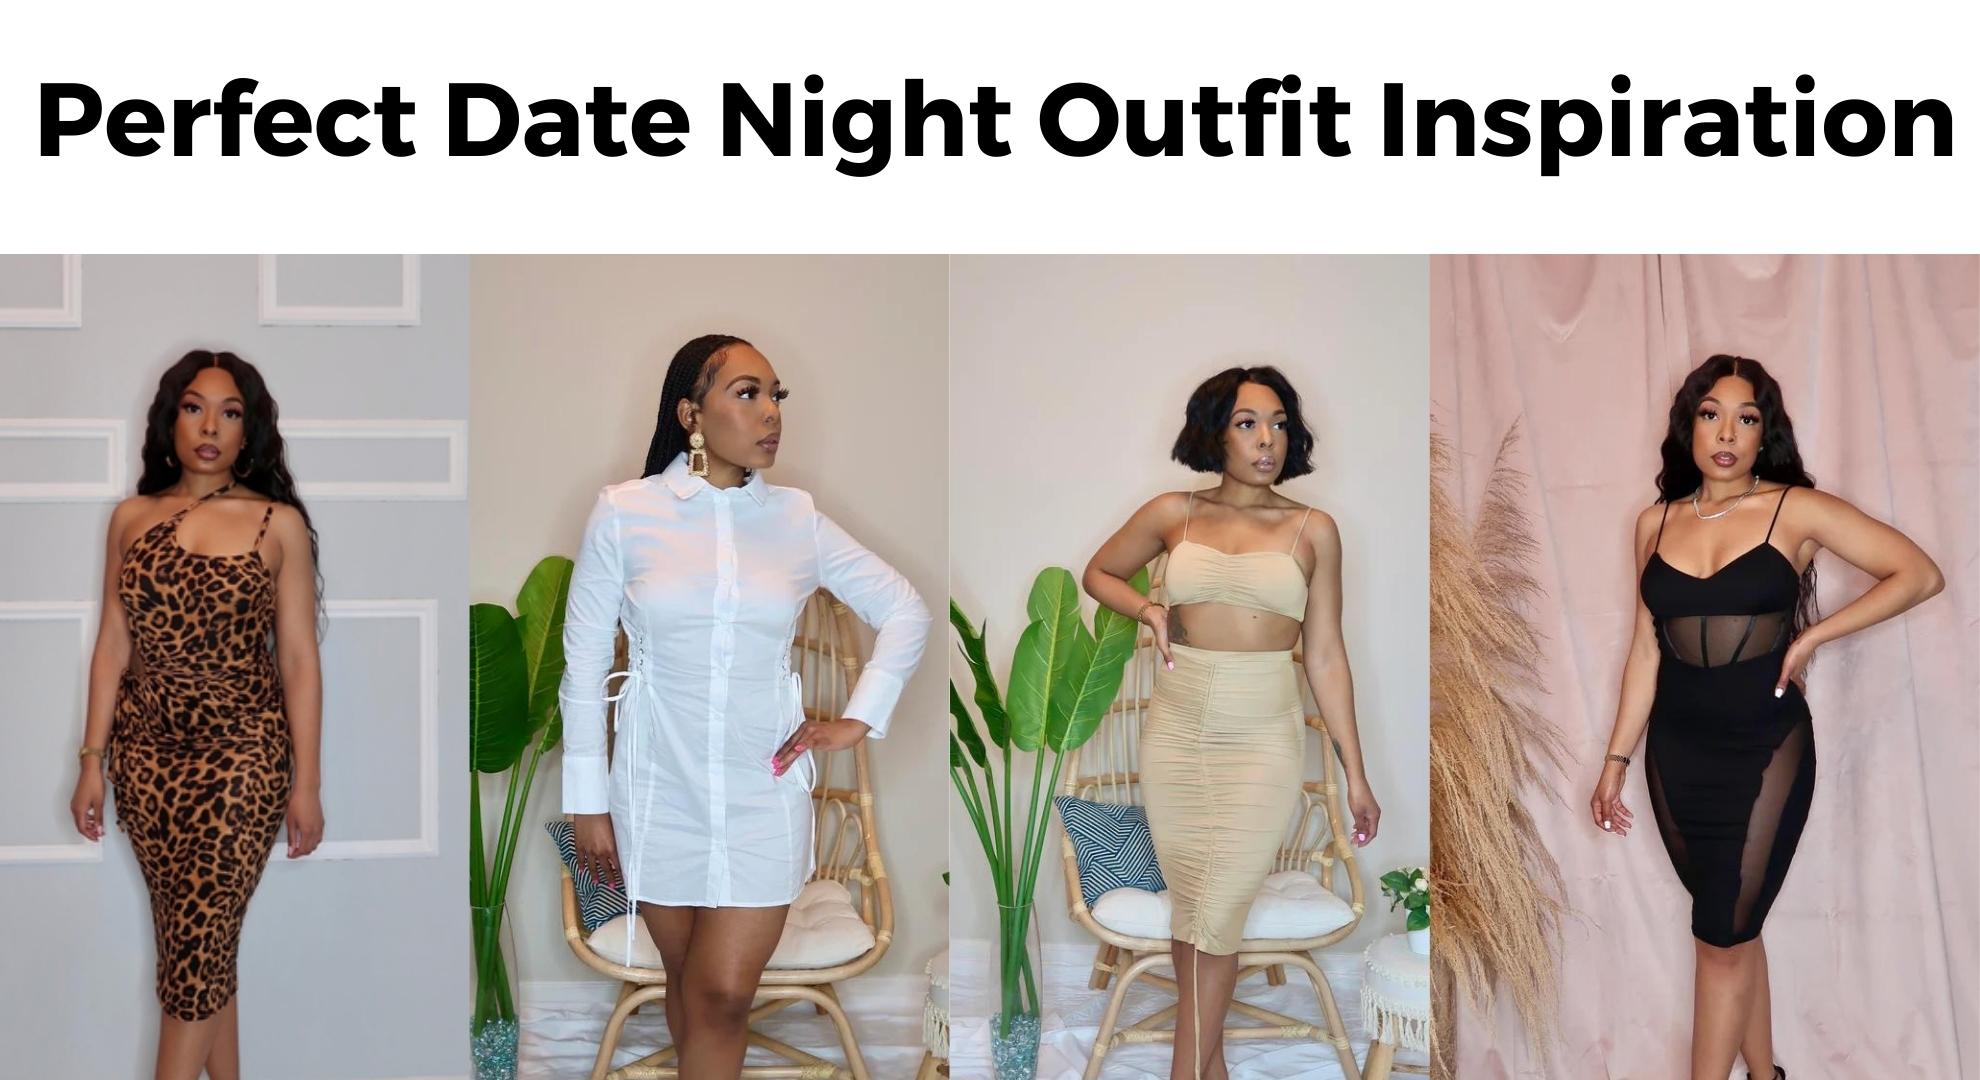 Perfect Date Night Outfit Inspiration: 5+ Looks to Up Your Game